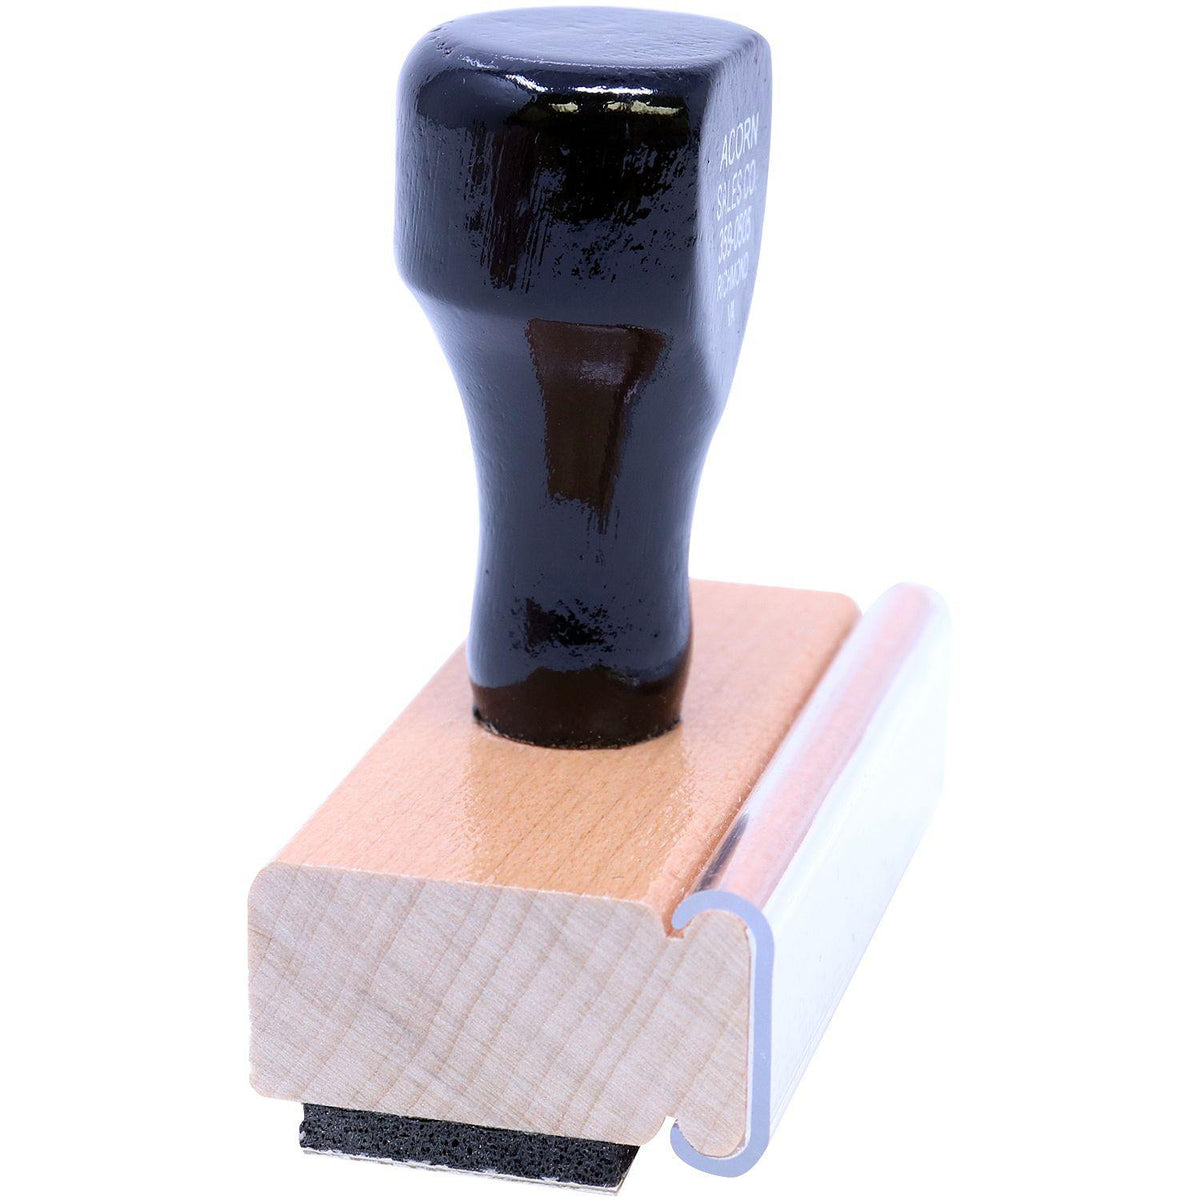 Side View of Large Received with Line Rubber Stamp at an Angle